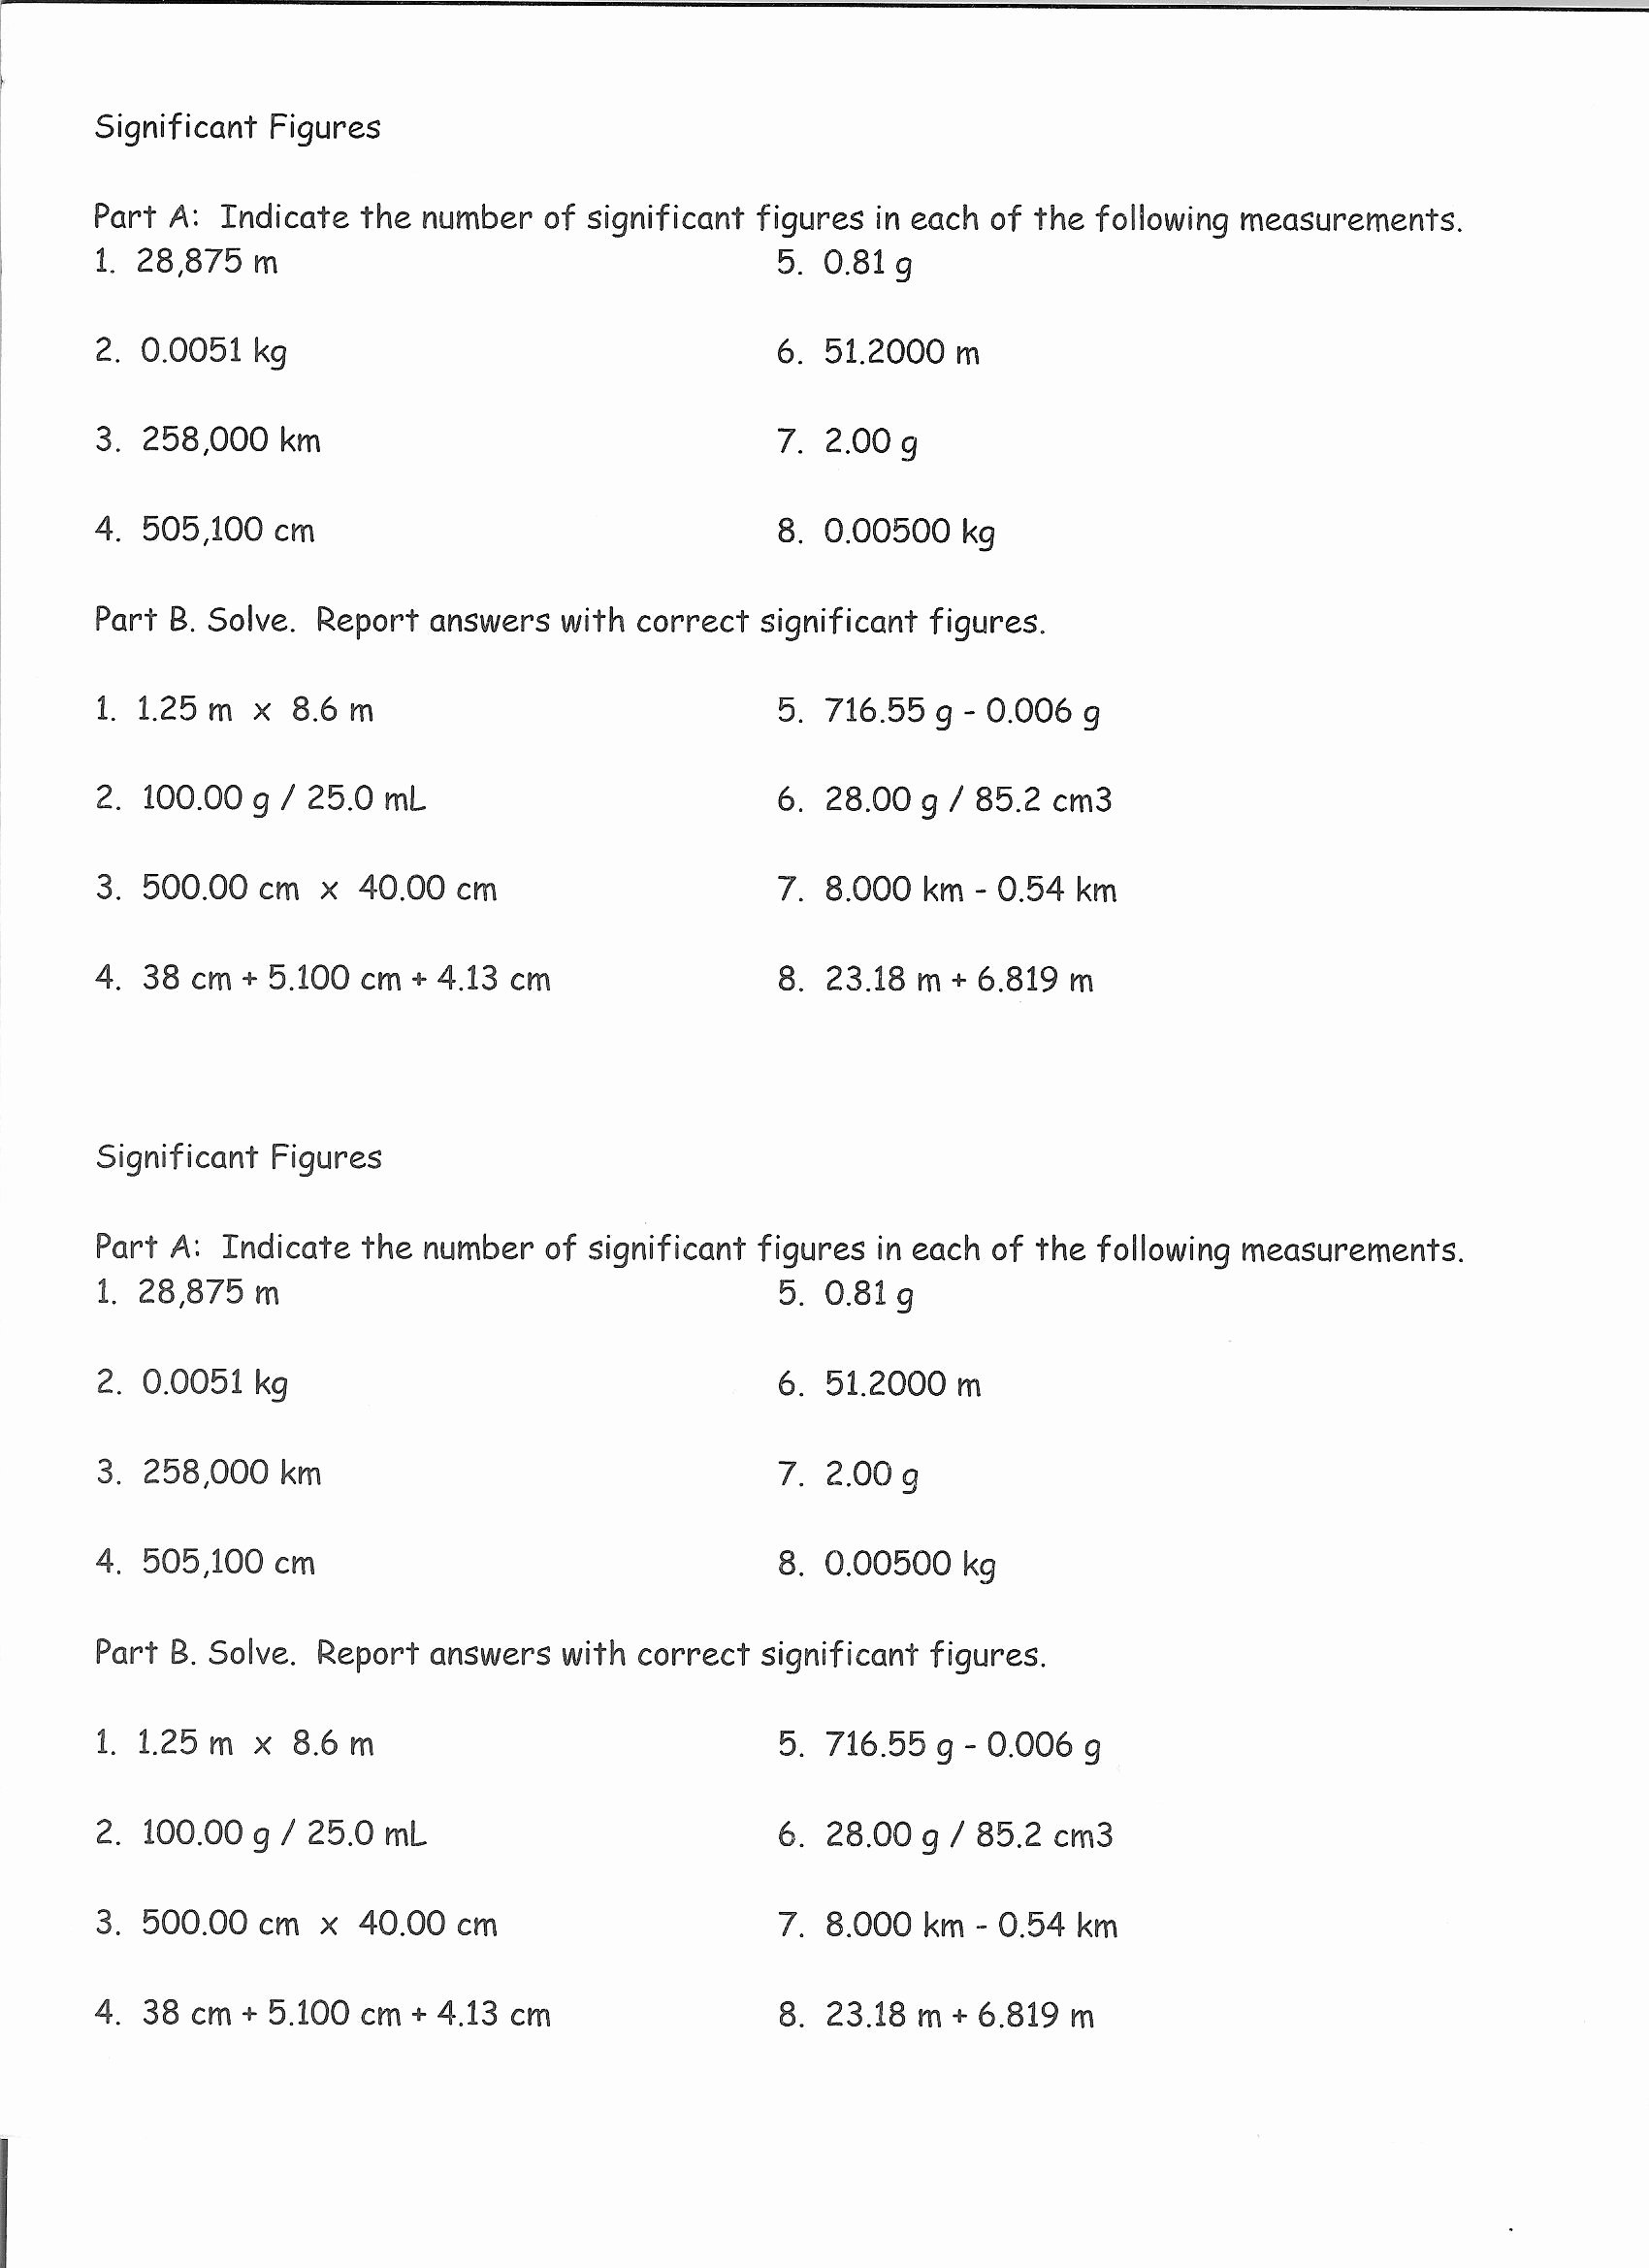 Scientific Notation Worksheet Chemistry Inspirational Significant Figures and Scientific Notation Worksheet